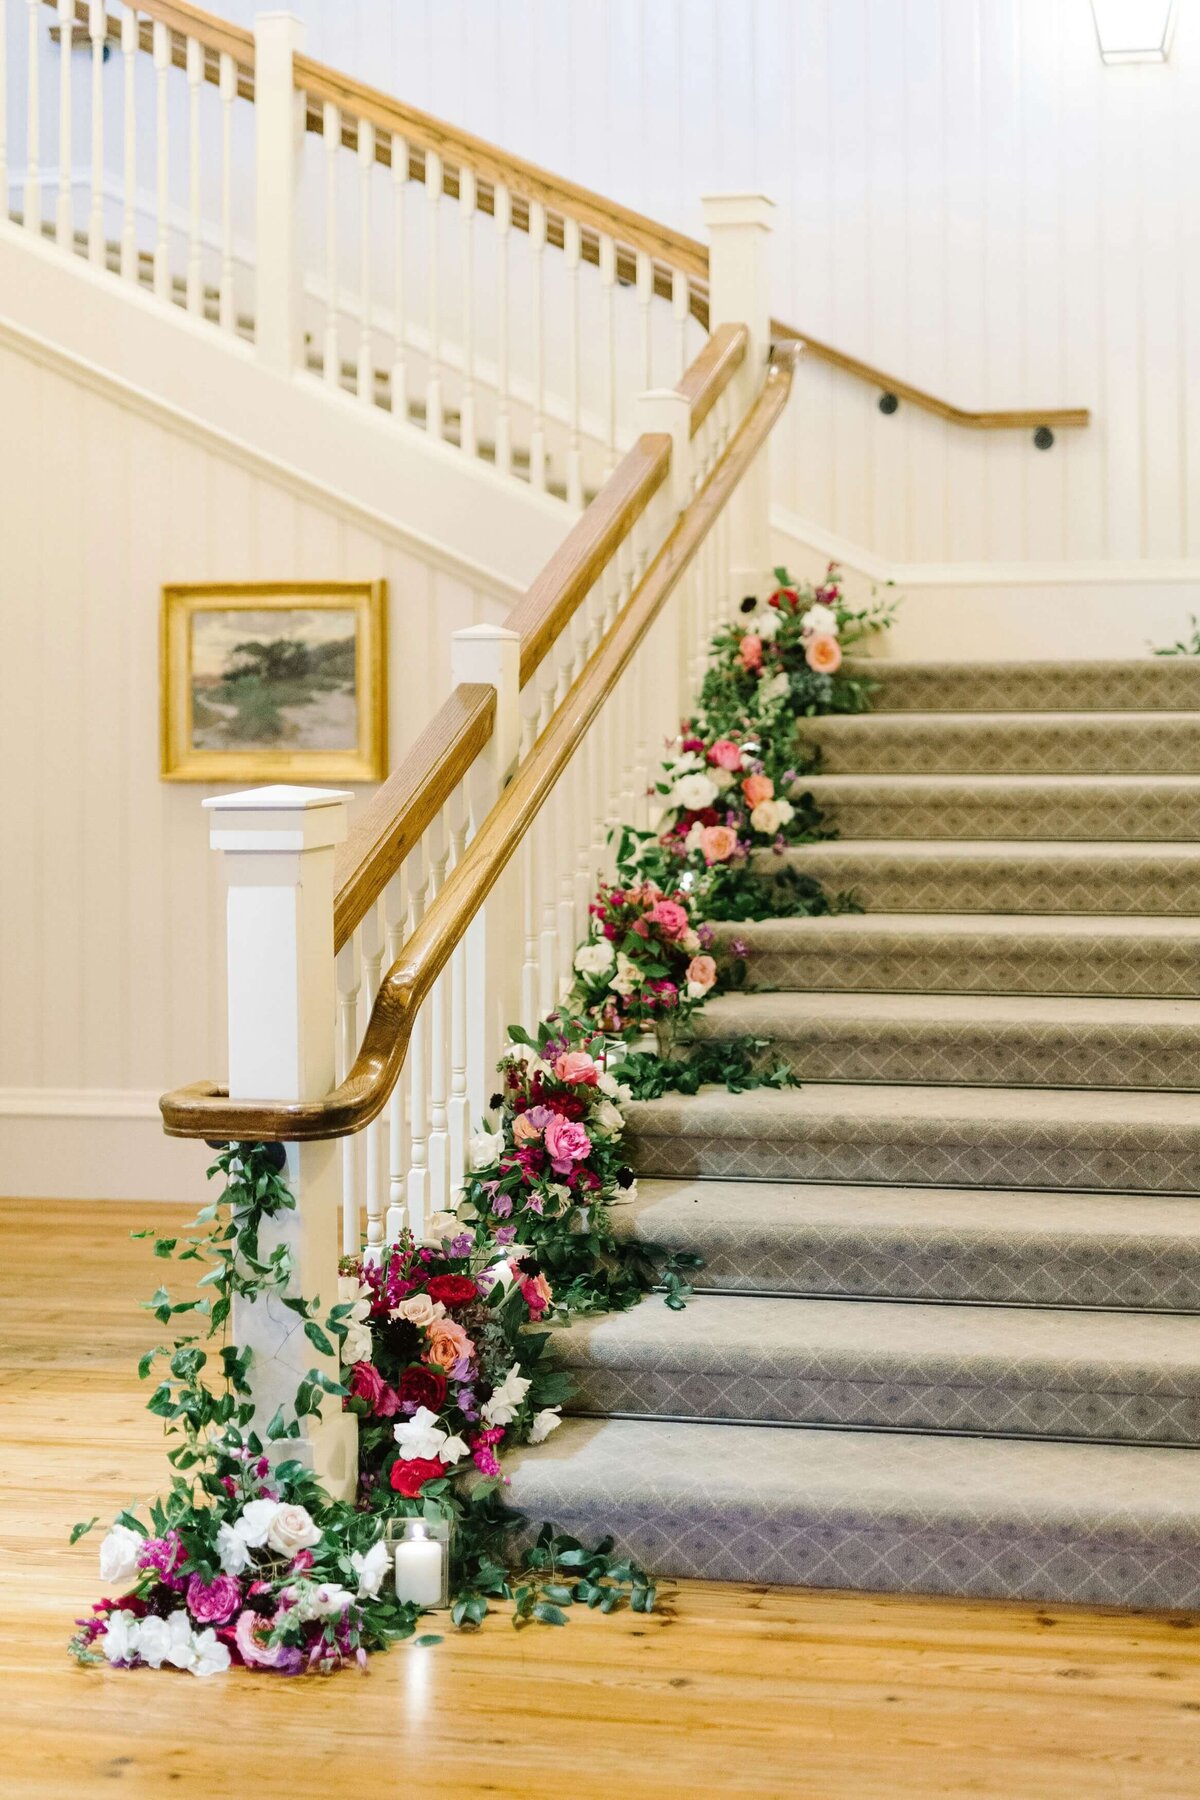 floral decor on the staircase